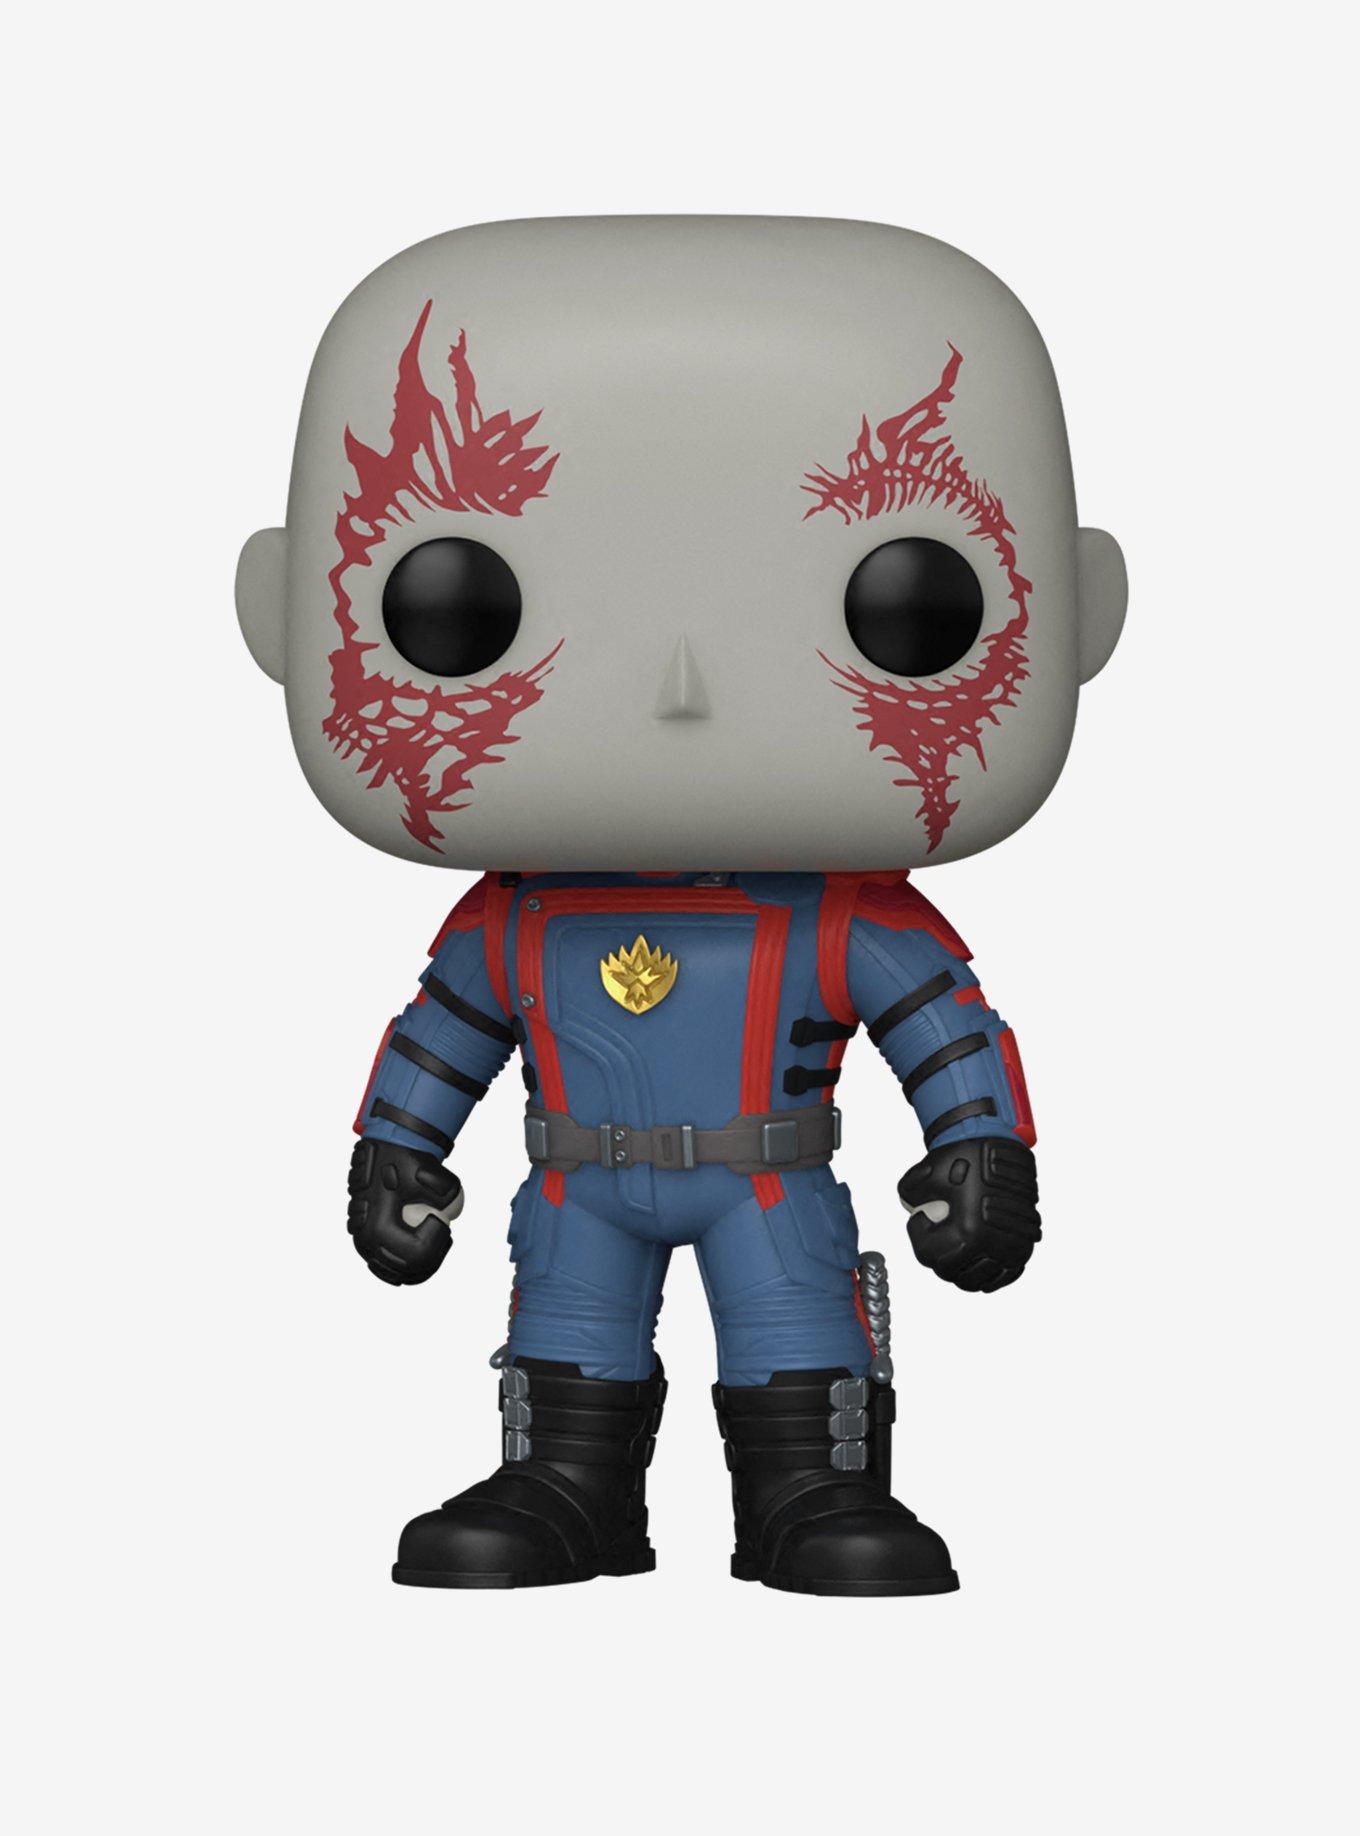 Buy Pop! Guardians of the Galaxy Vol. 3 6-Pack at Funko.